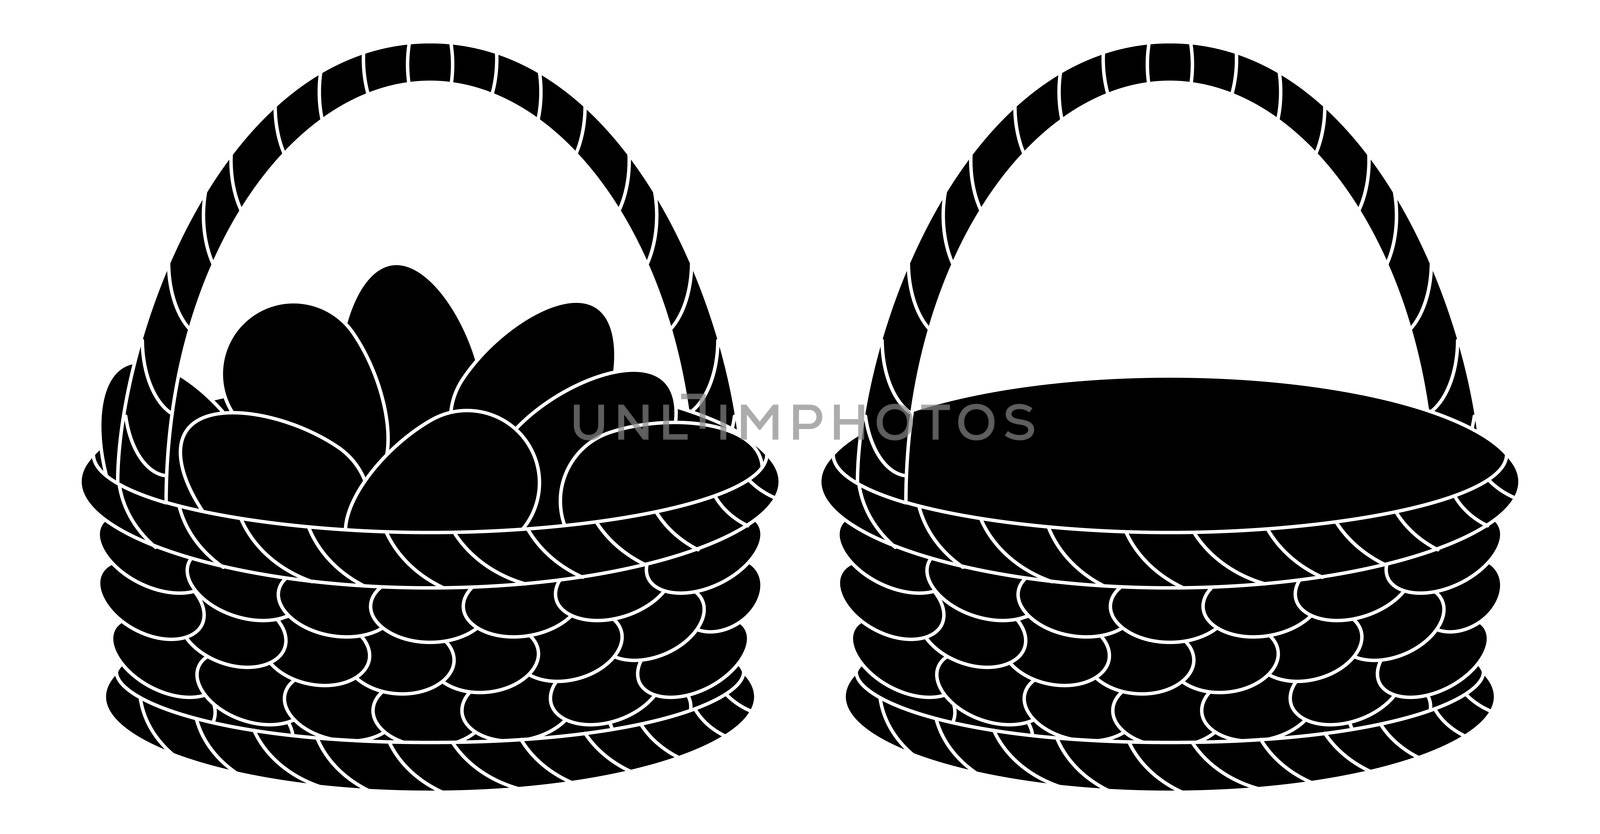 Baskets, empty and with eggs, silhouettes by alexcoolok